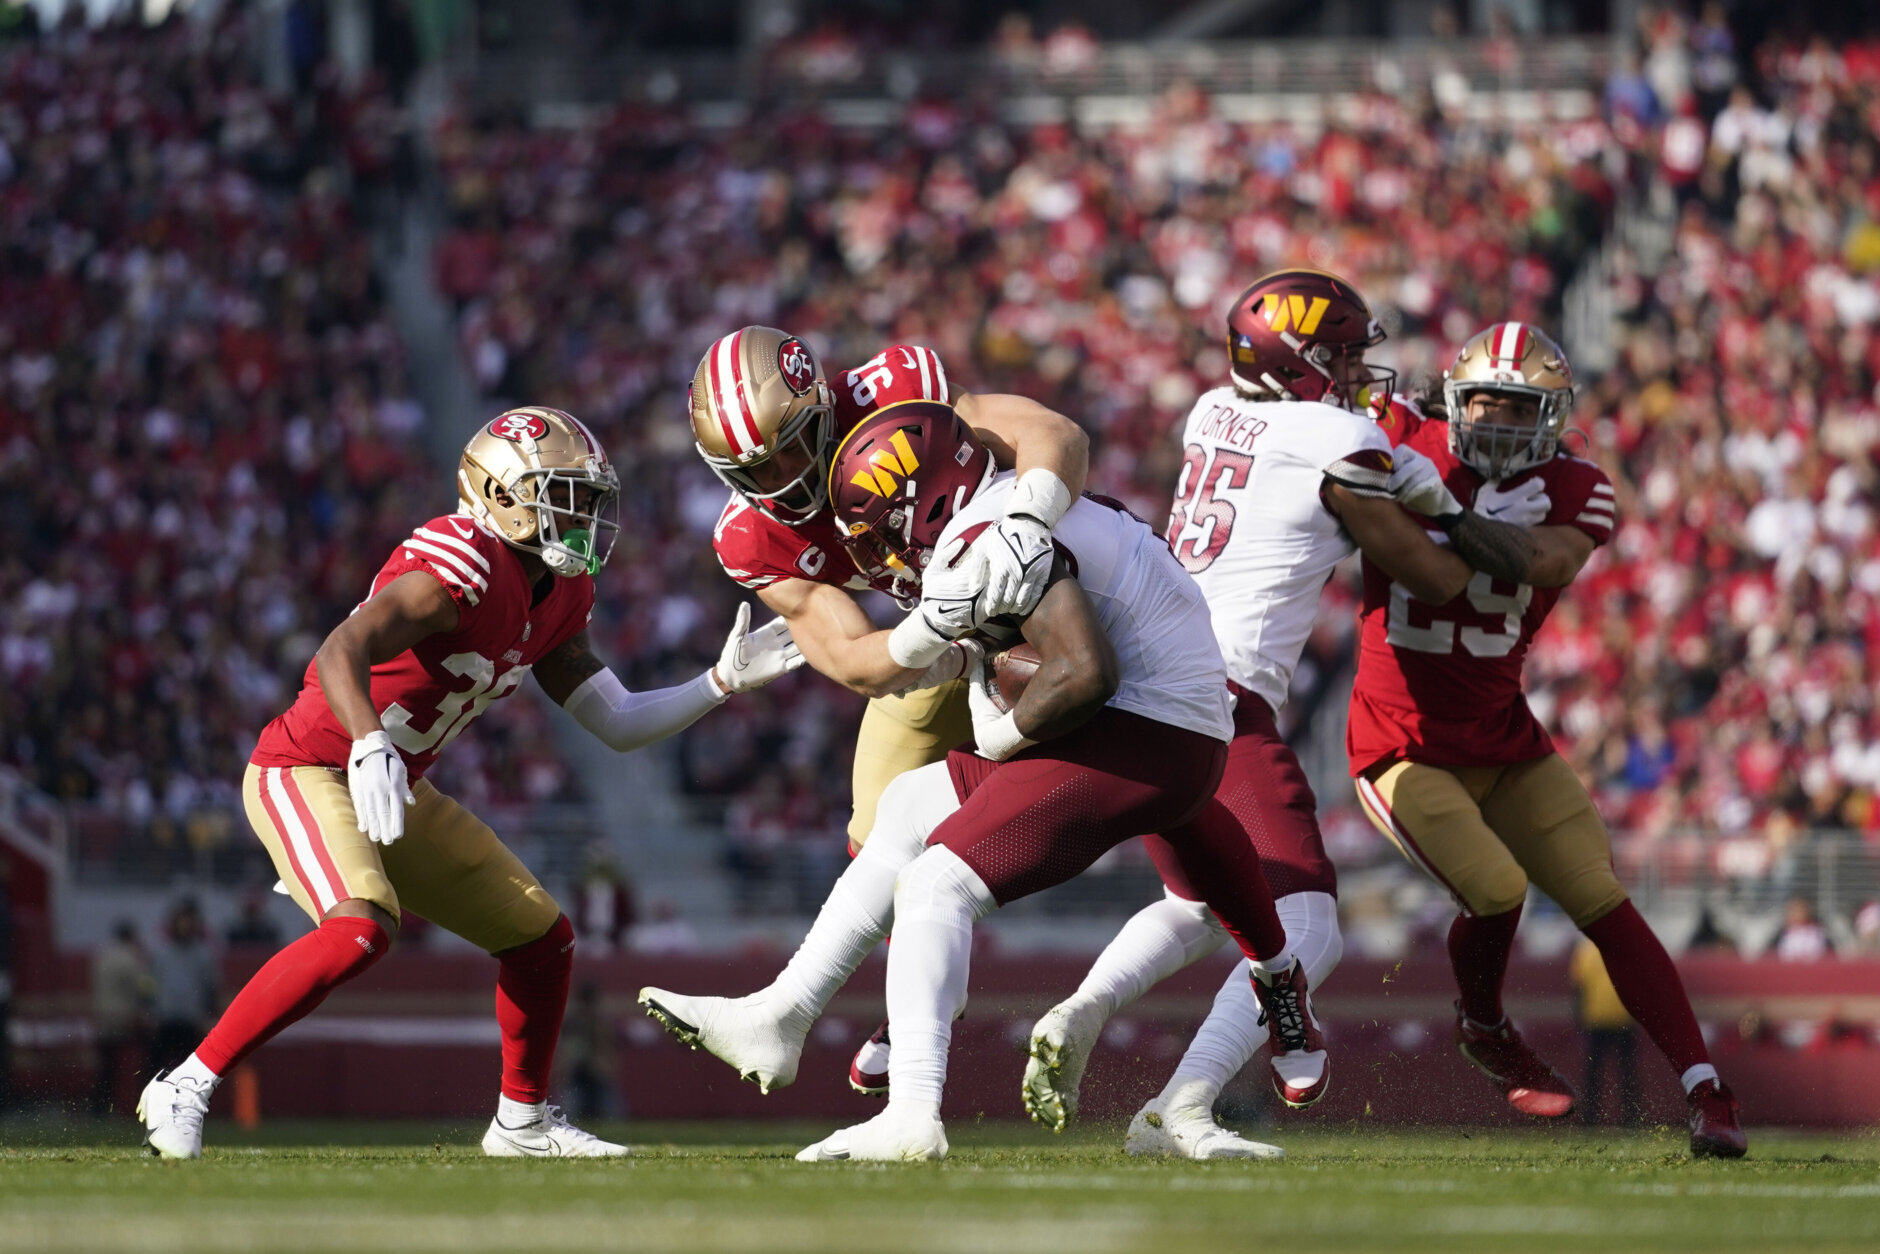 <p><em><strong>Commanders 20</strong></em><br />
<em><strong>49ers 37</strong></em></p>
<p>Washington didn&#8217;t lose command of the last NFC wild card (pun intended) but it&#8217;s thrown some serious questions about the quarterback situation. Even if the Heinicke magic carpet ride isn&#8217;t over, it&#8217;s hit some serious turbulence and it&#8217;s hard to see the Commanders winning their final two games.</p>
<p>Meanwhile, San Francisco&#8217;s eight-game win streak has to make them the favorite in the NFC, right? Nick Bosa leads the league in sacks, the defense is a firm No. 1 and Brock Purdy is doing Kurt Warner things. The Niners look legit.</p>
